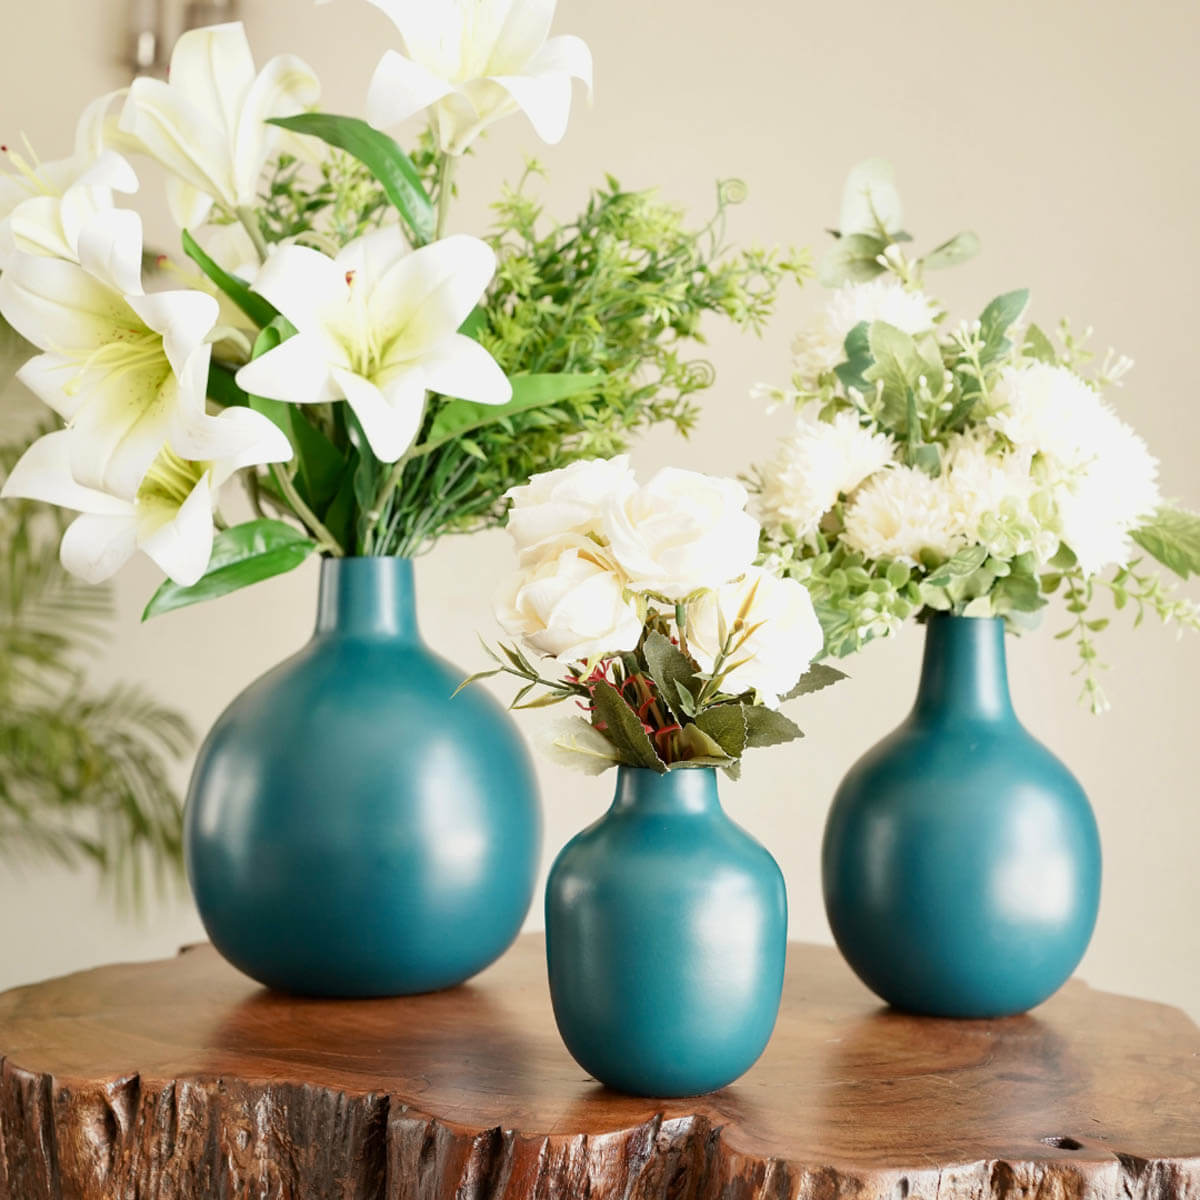 Flower vase with flowers - set of 3 